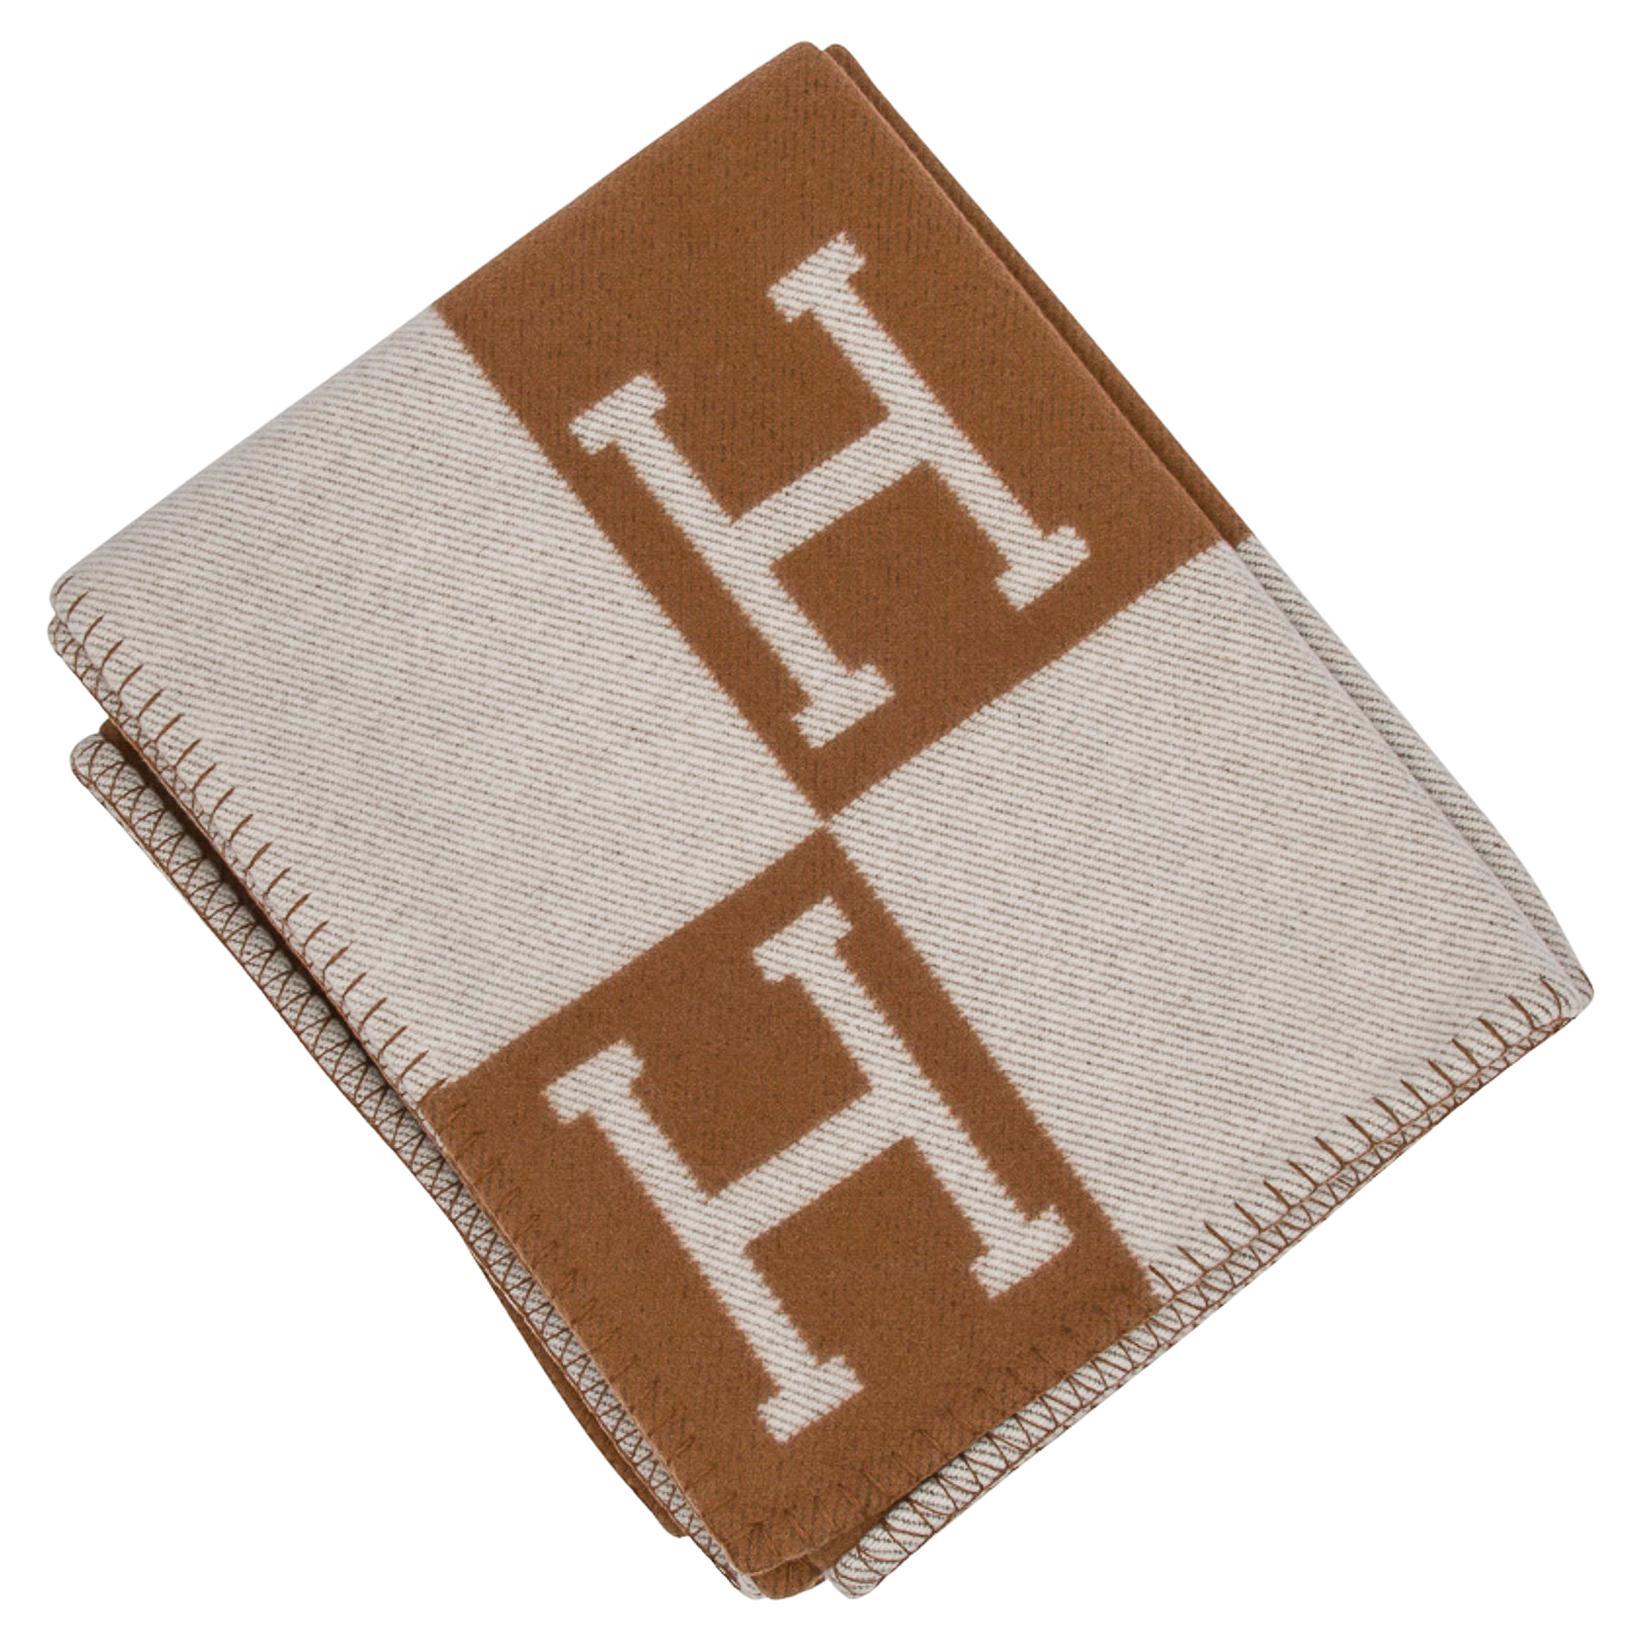 Hermes Blanket Avalon III Signature H Camel and Ecru Throw New